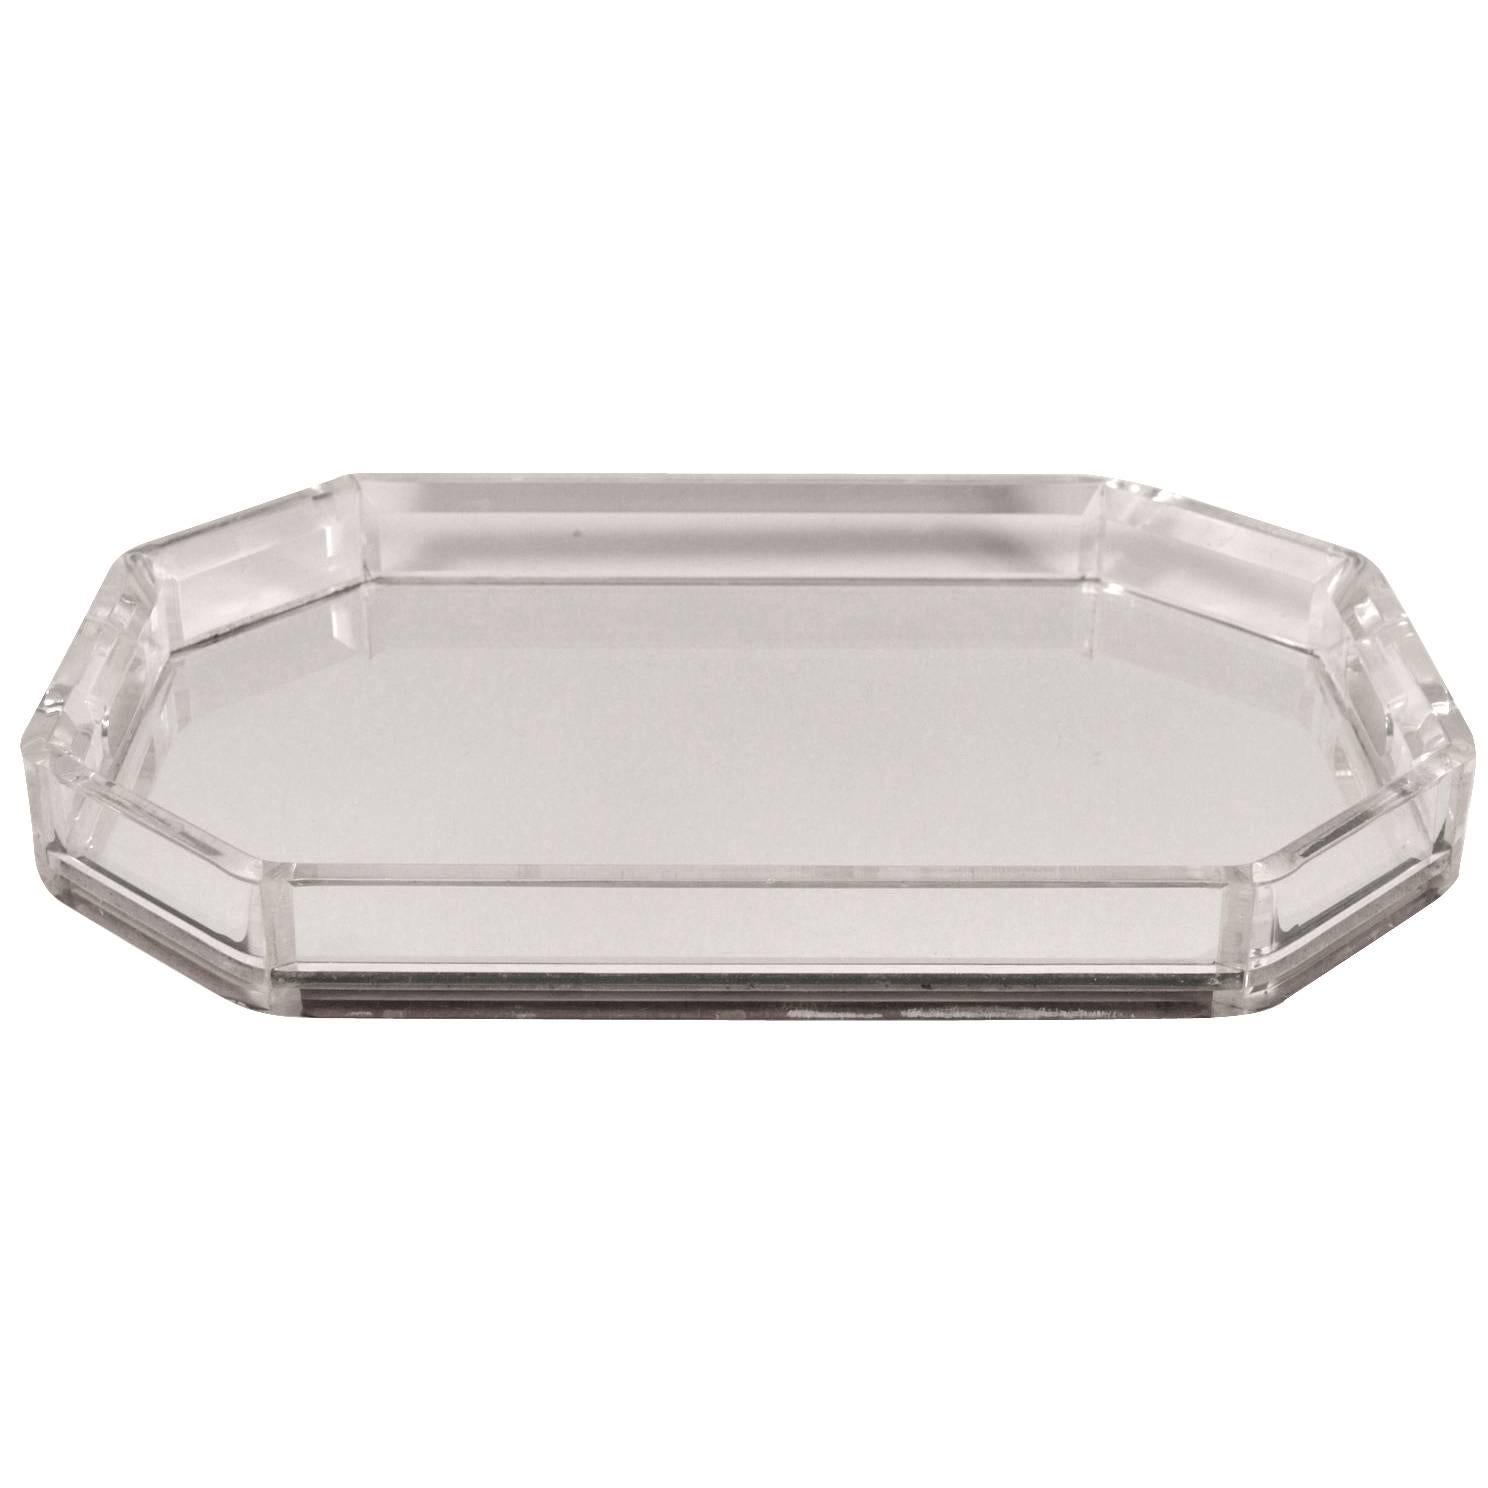 Lucite Tray with Mirrored Surface